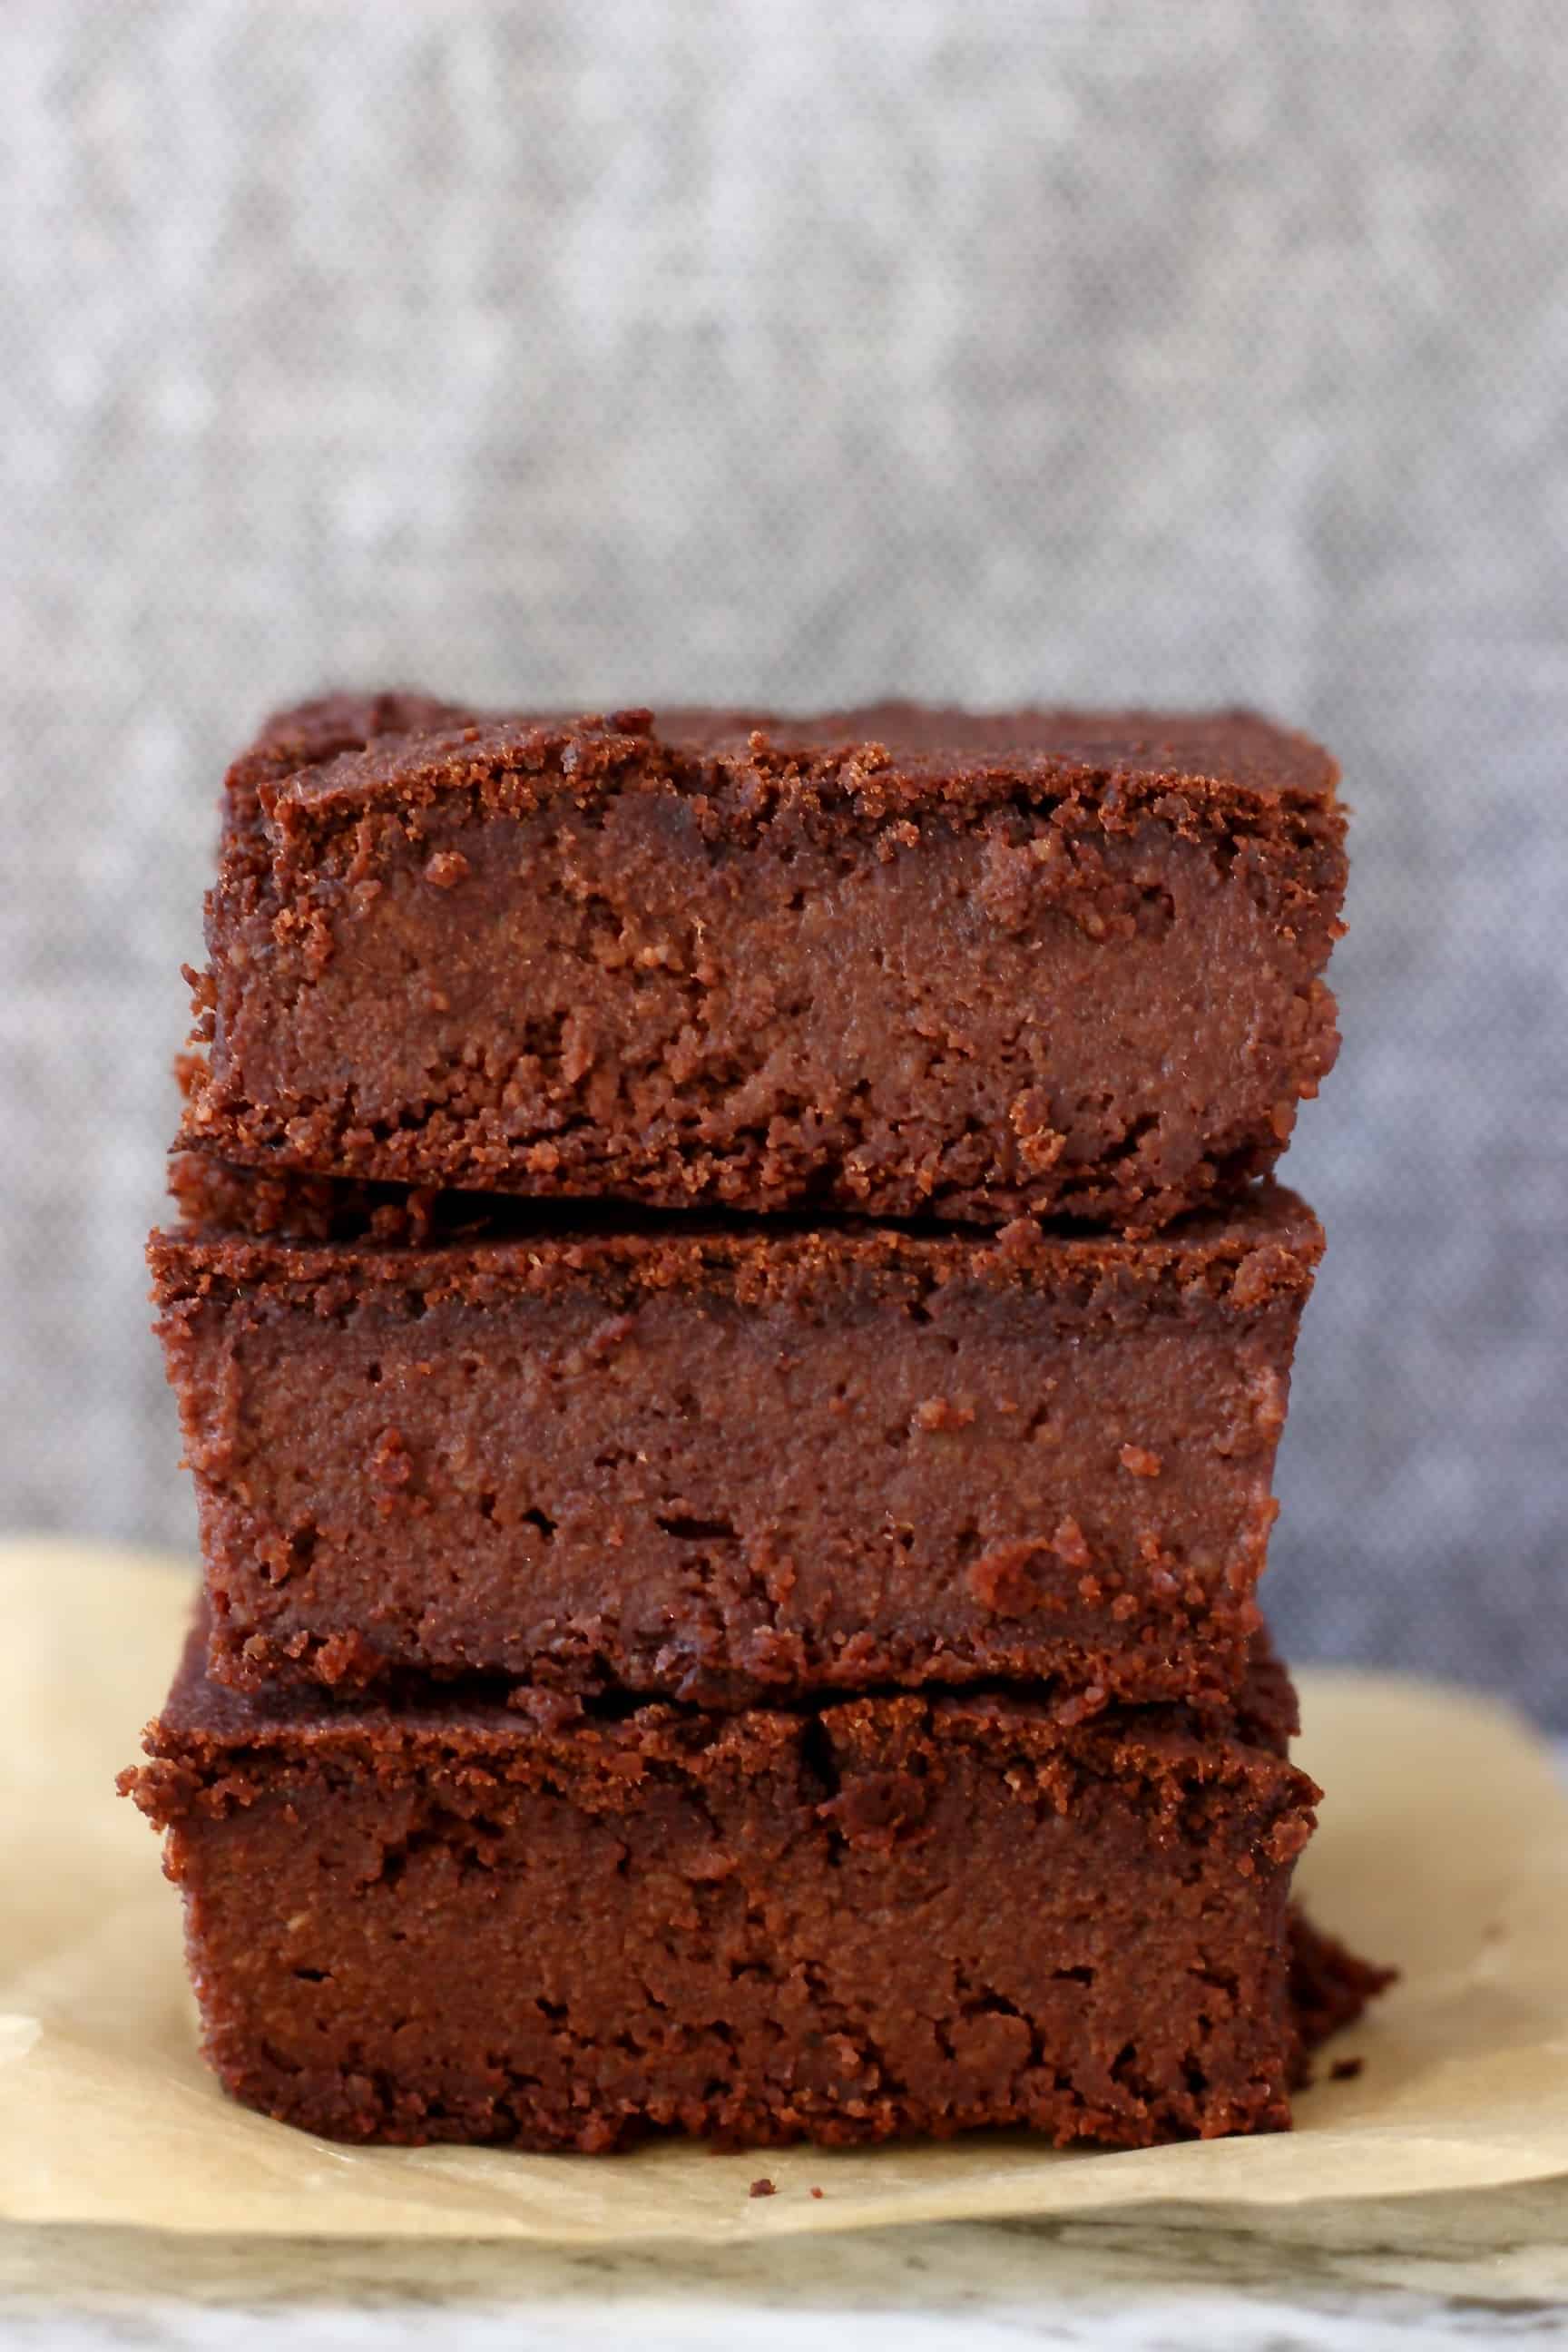 Three vegan black bean brownies stacked on top of each other against a grey background